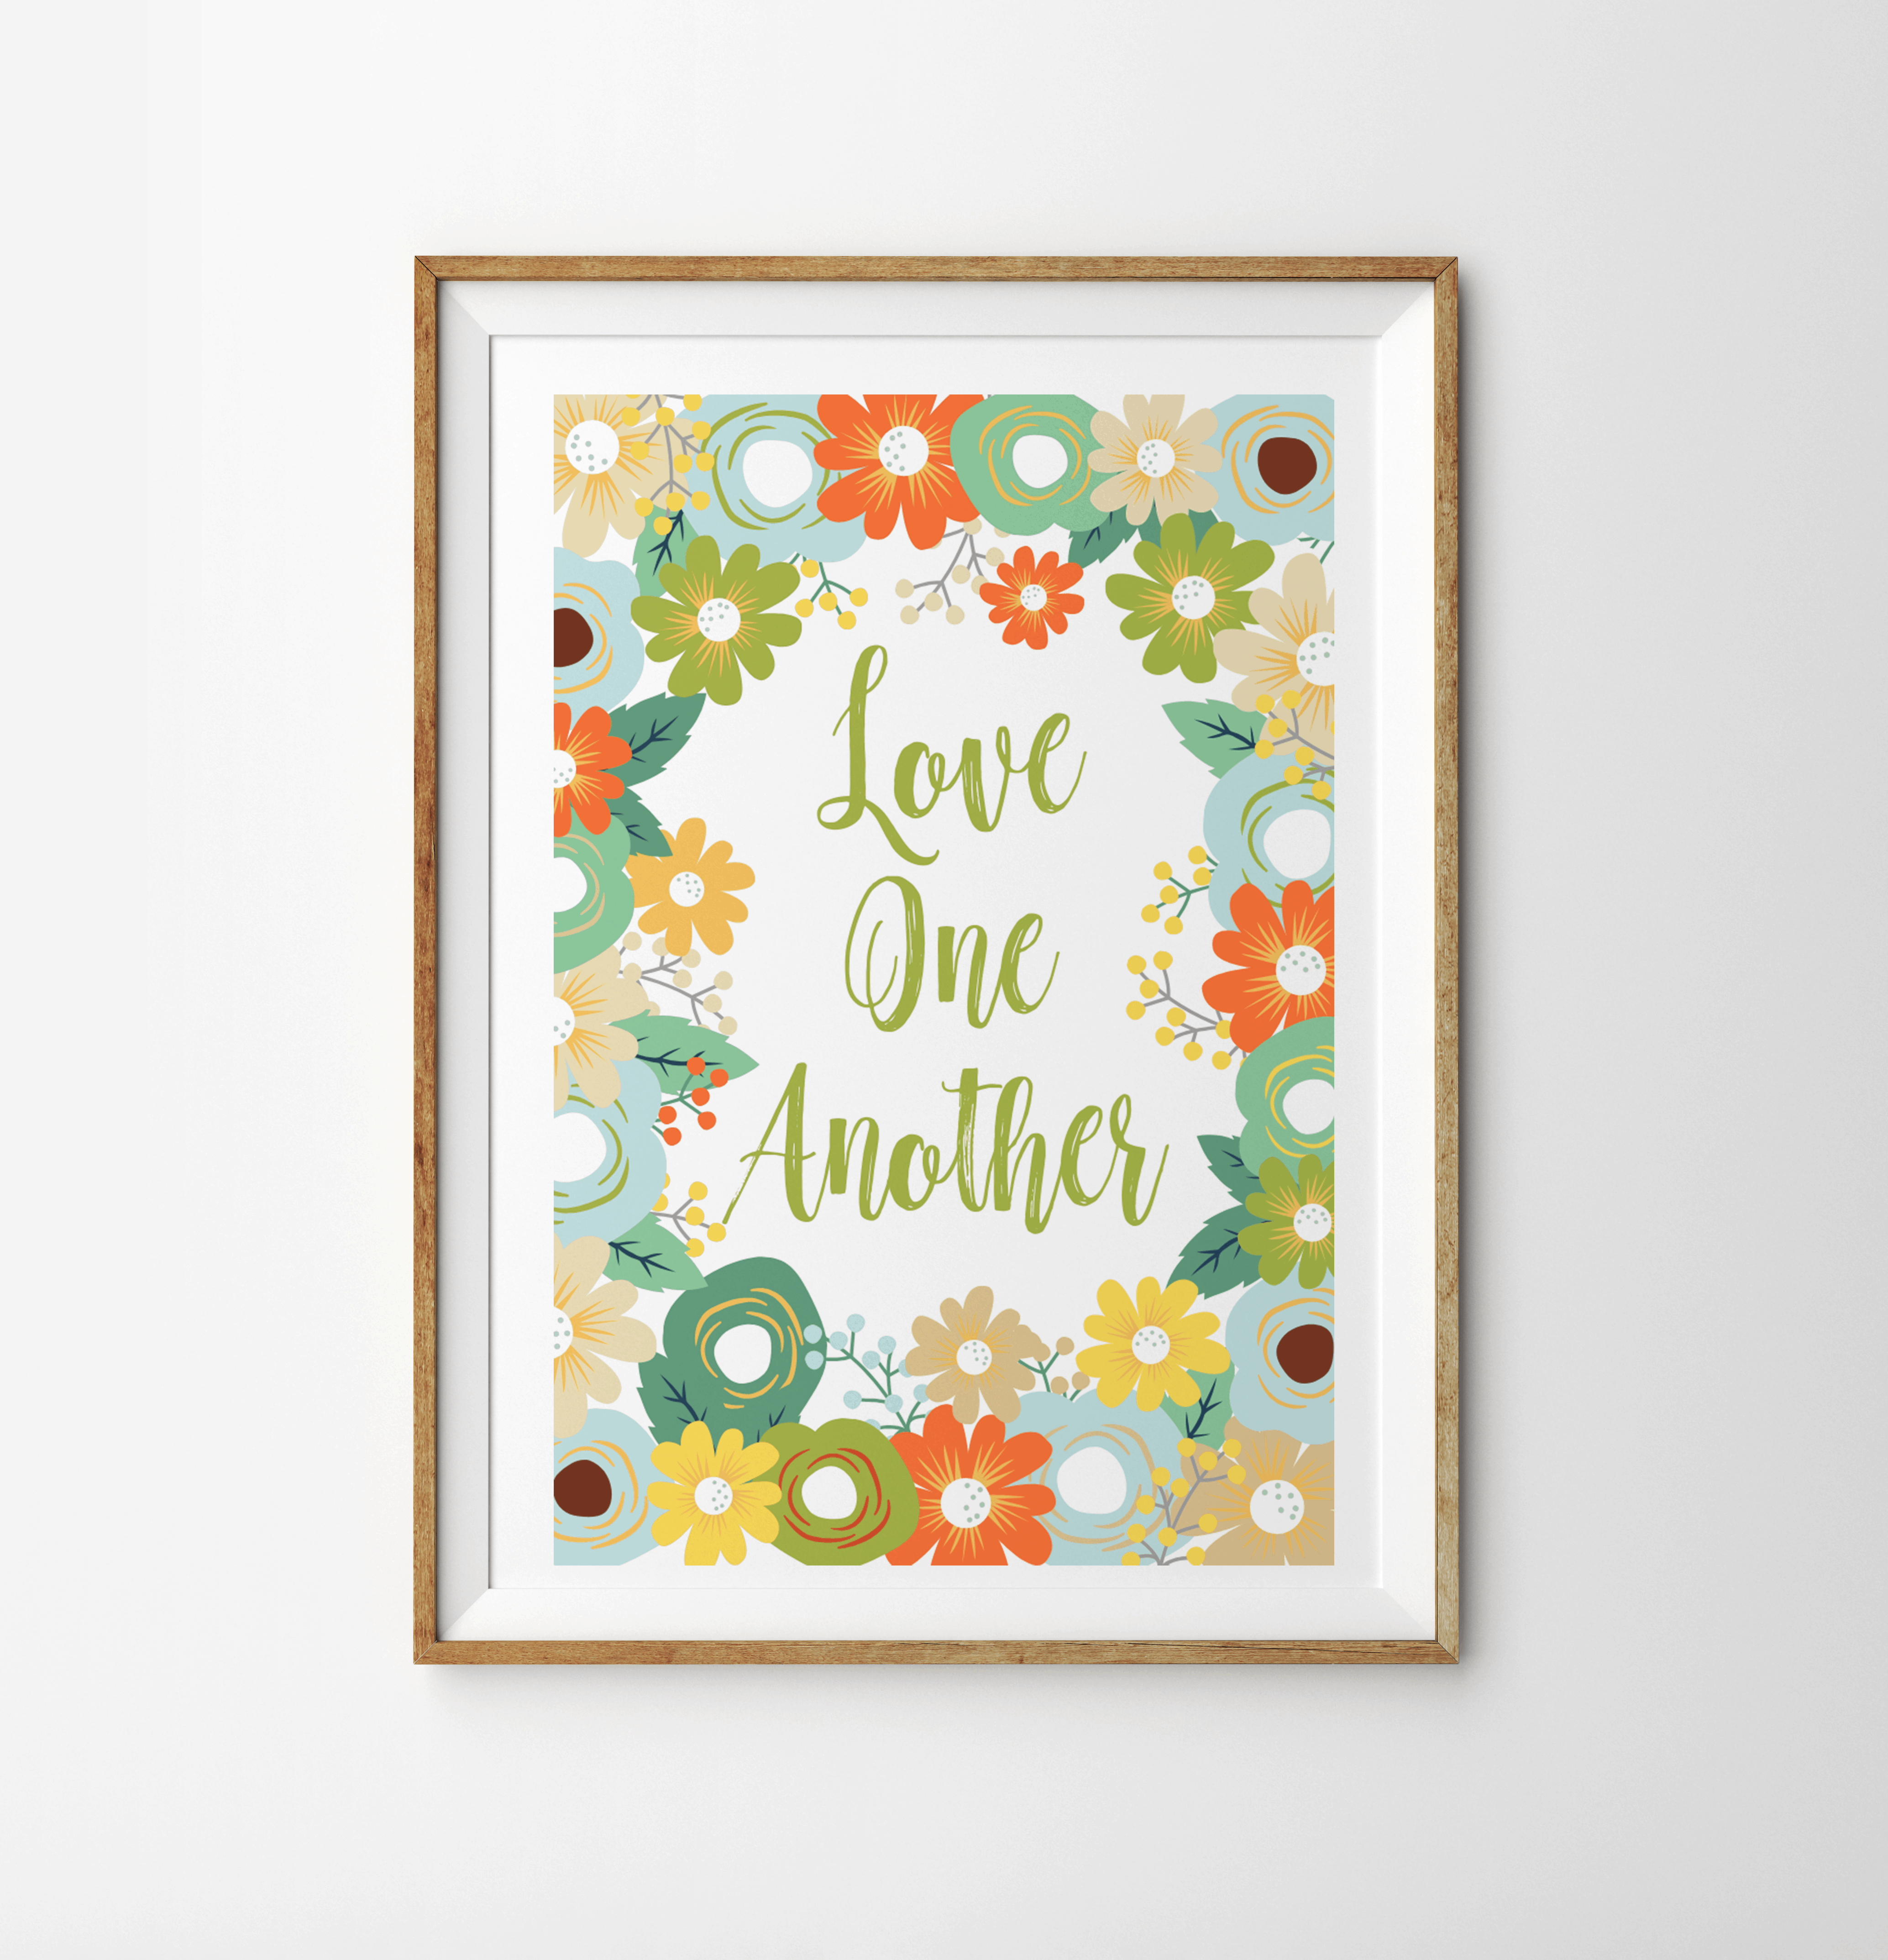 Love One Another (PDF)